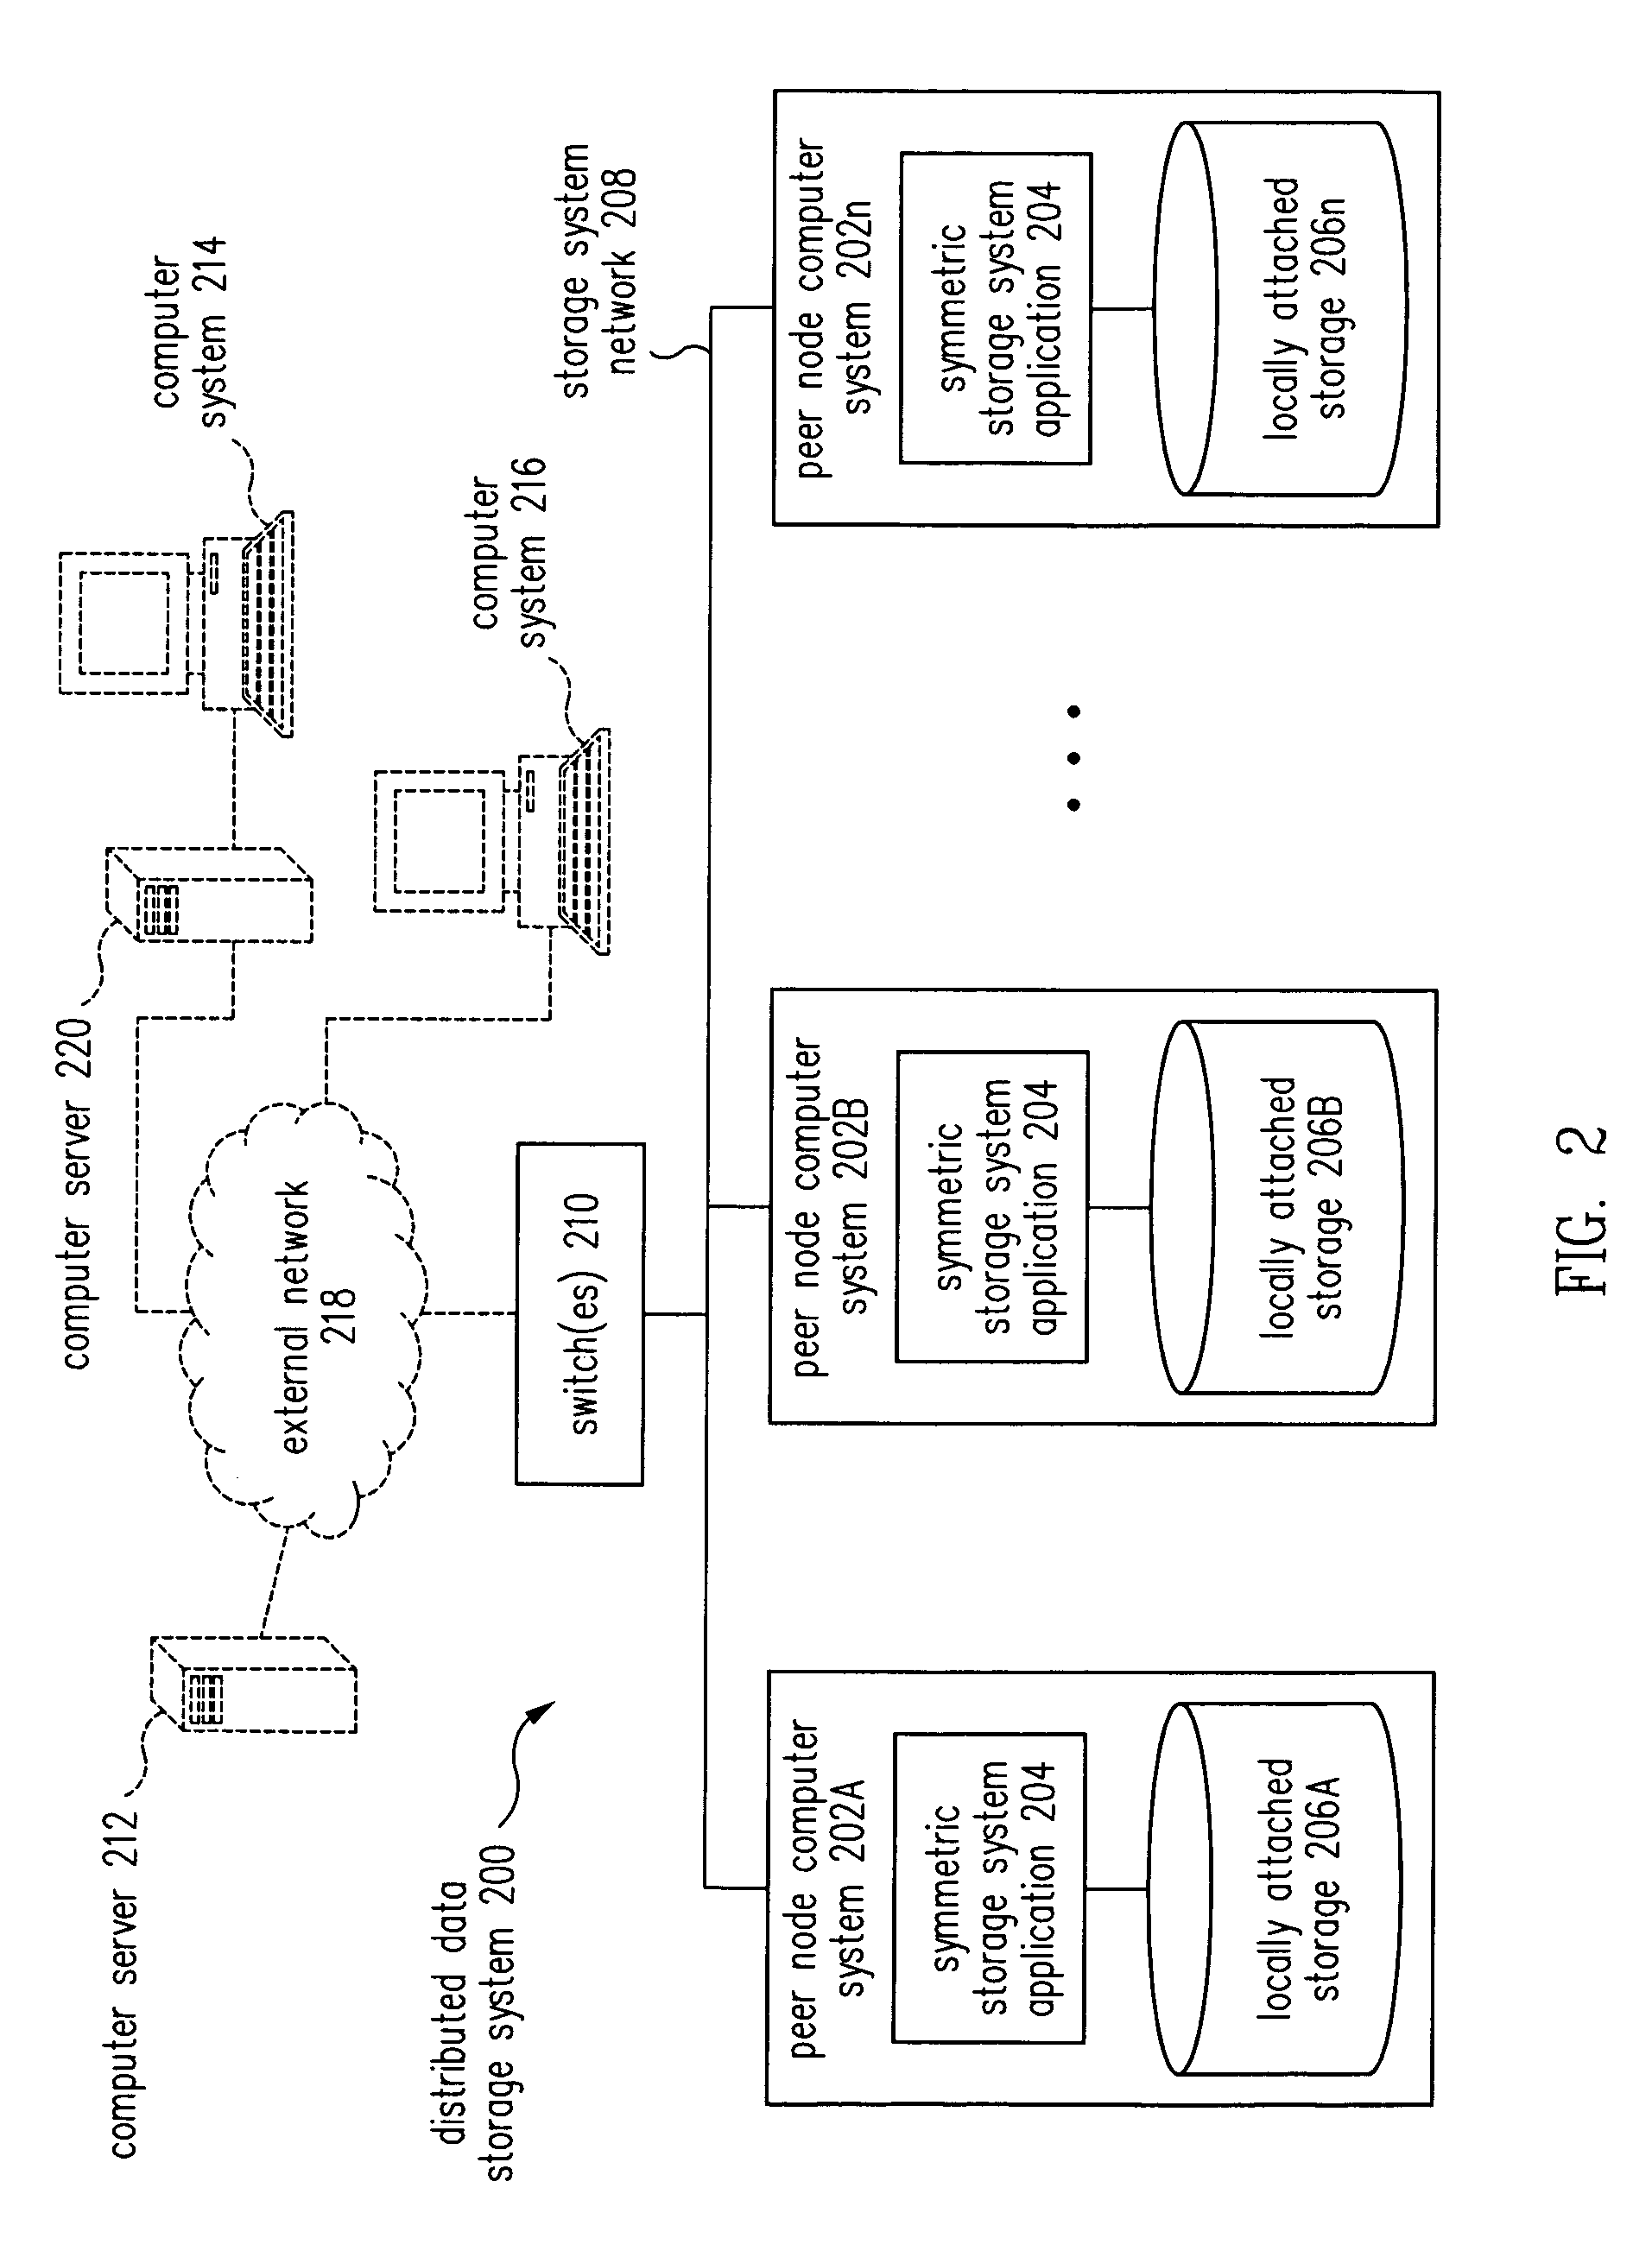 Method for distributed storage of data